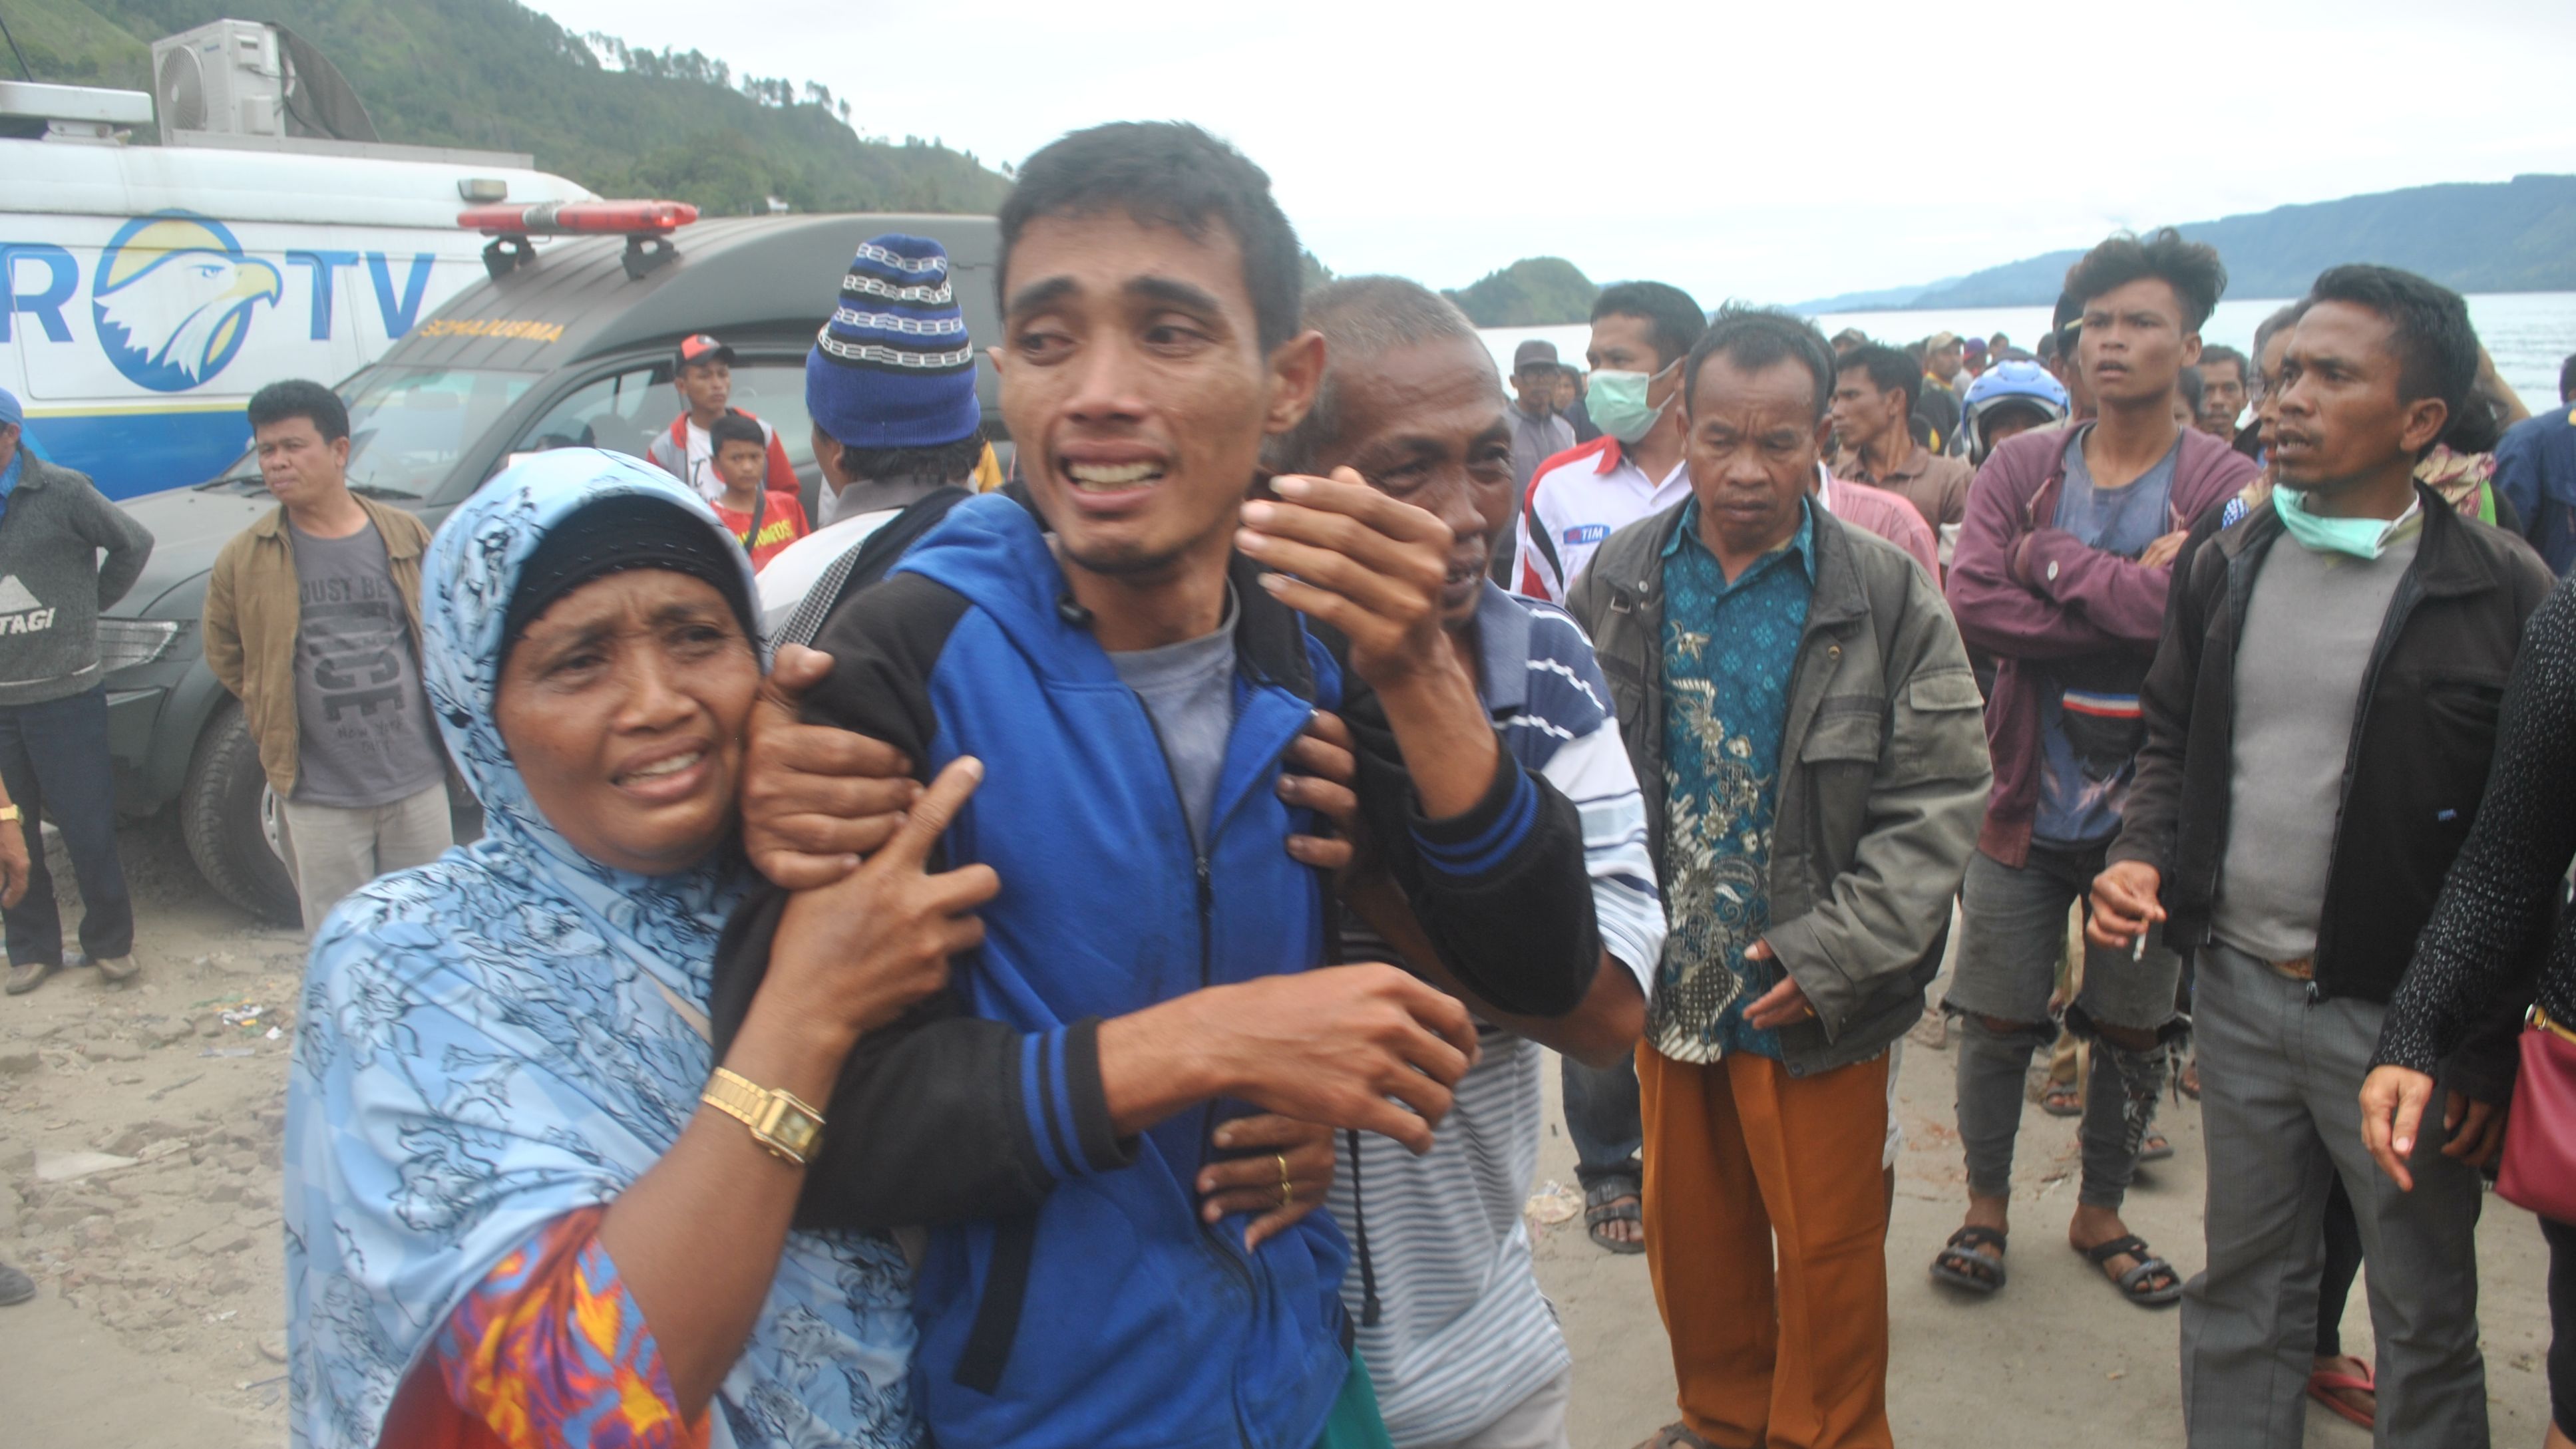 Families await news of their loved ones, thought to have drowned aboard the stricken tourist ferry.